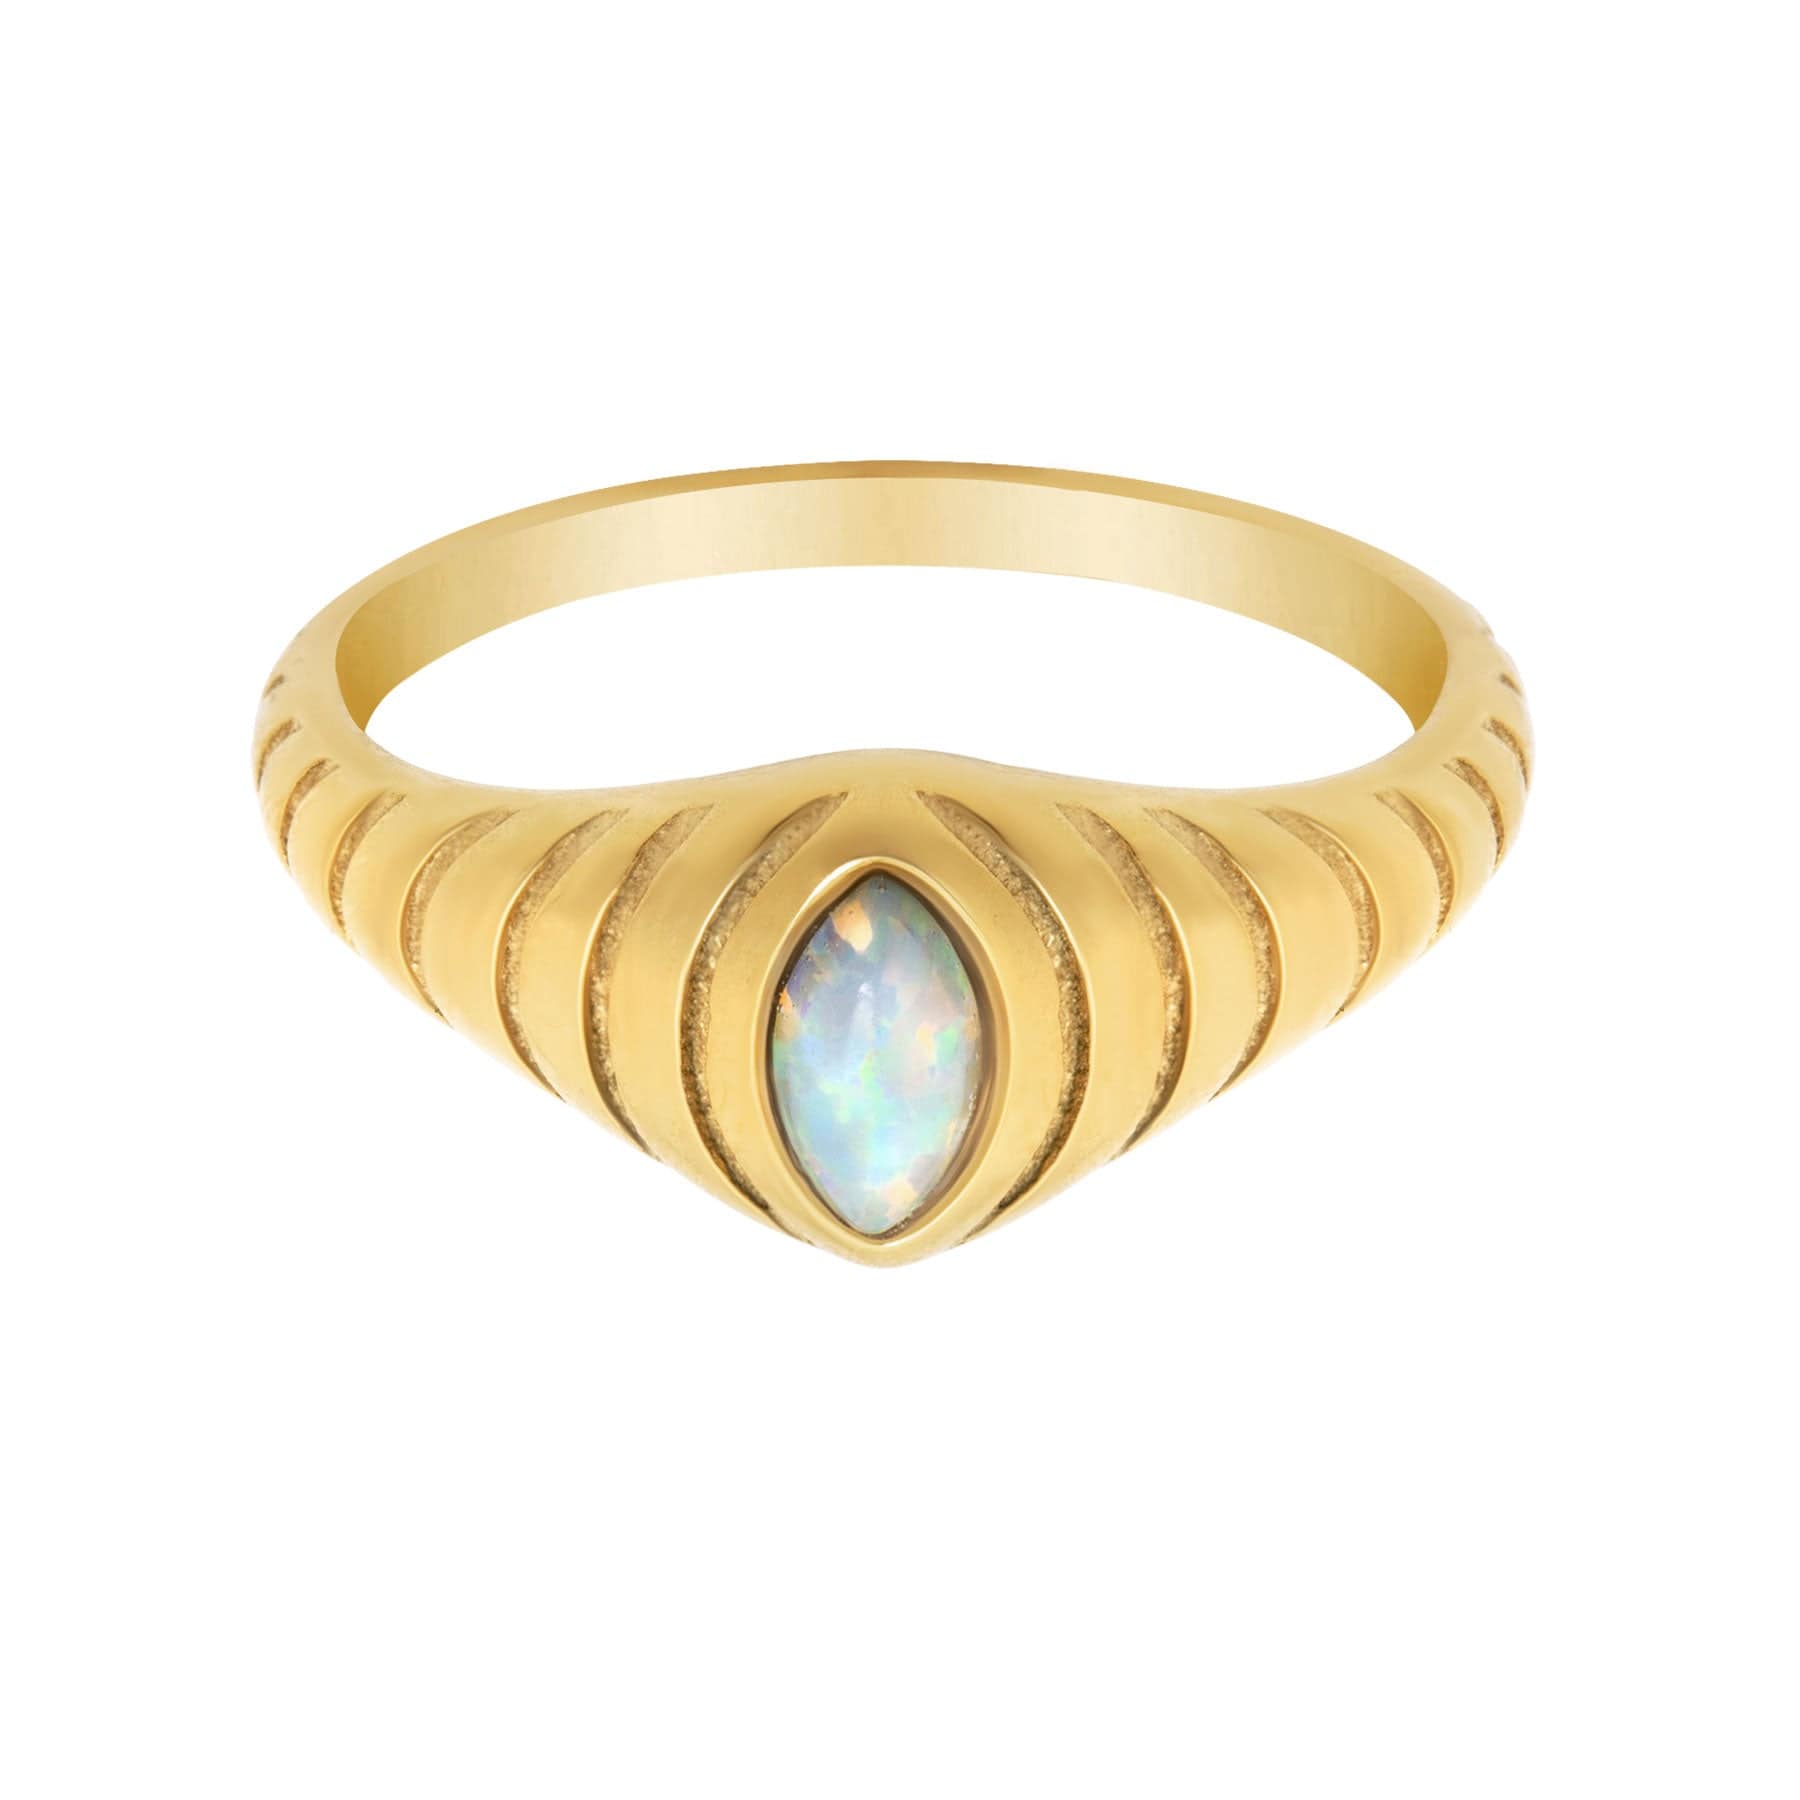 BohoMoon Stainless Steel Clara Opal Ring Gold / US 6 / UK L / EUR 51 (small)